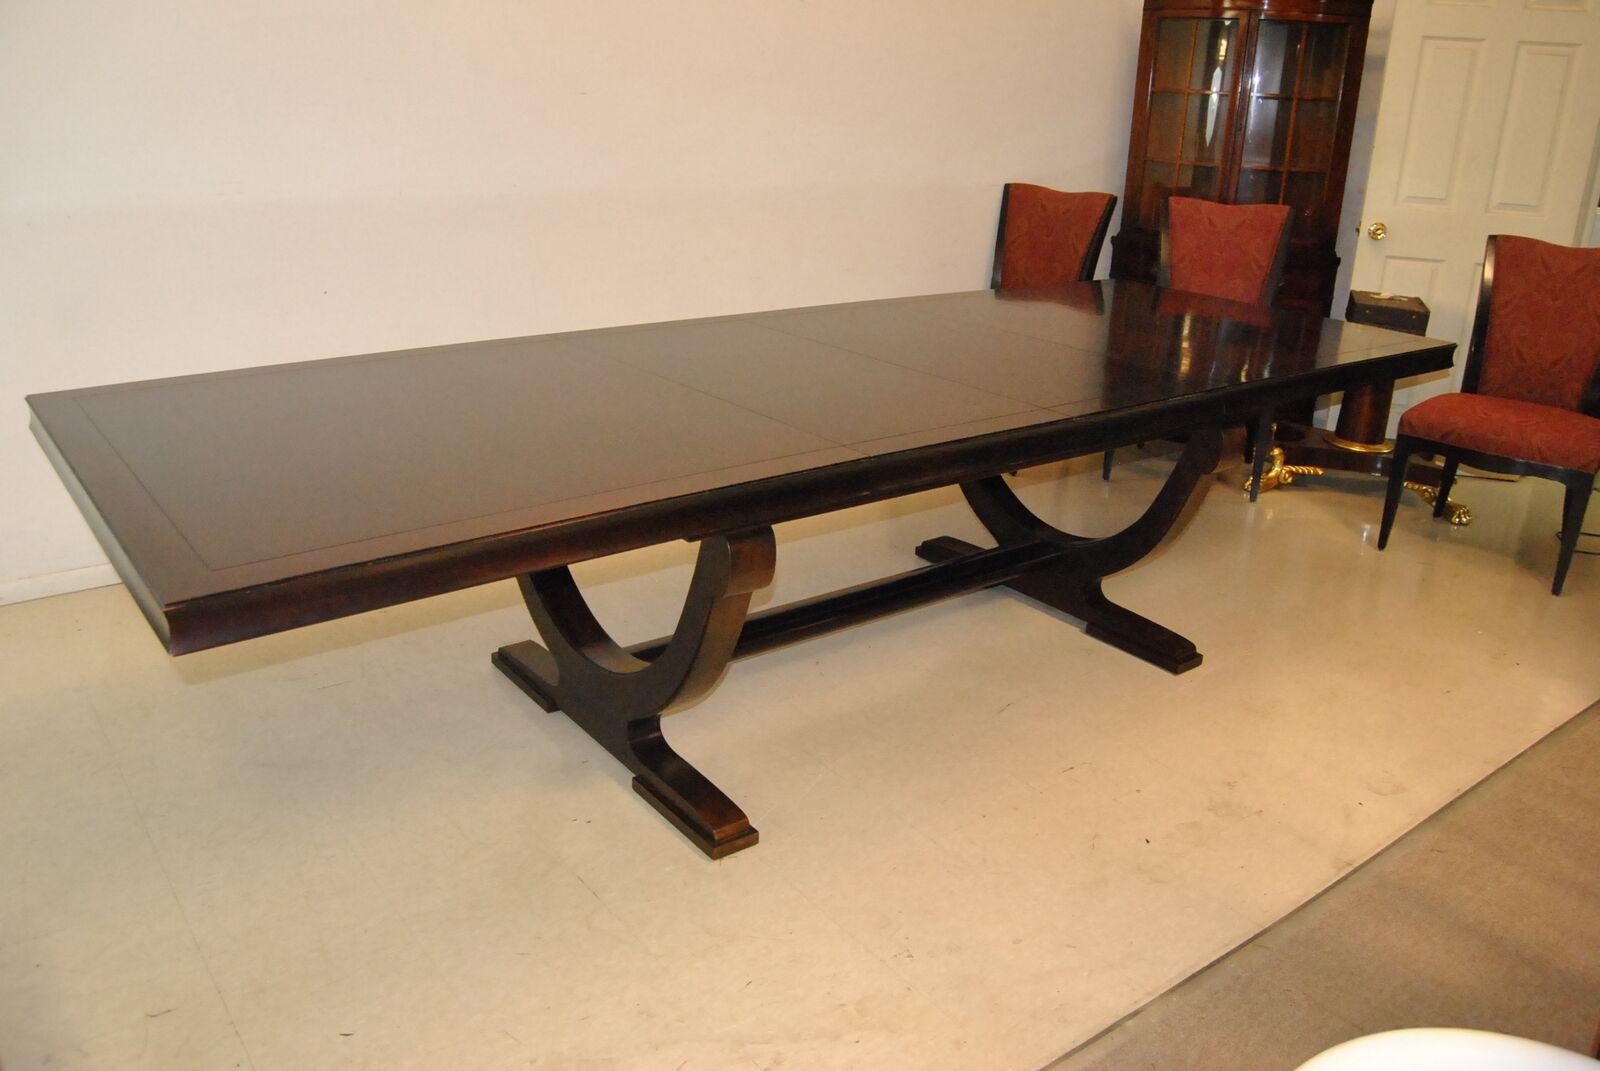 Mahogany Rectangle Dining Room Table by Barbara Barry for Baker Furniture 1